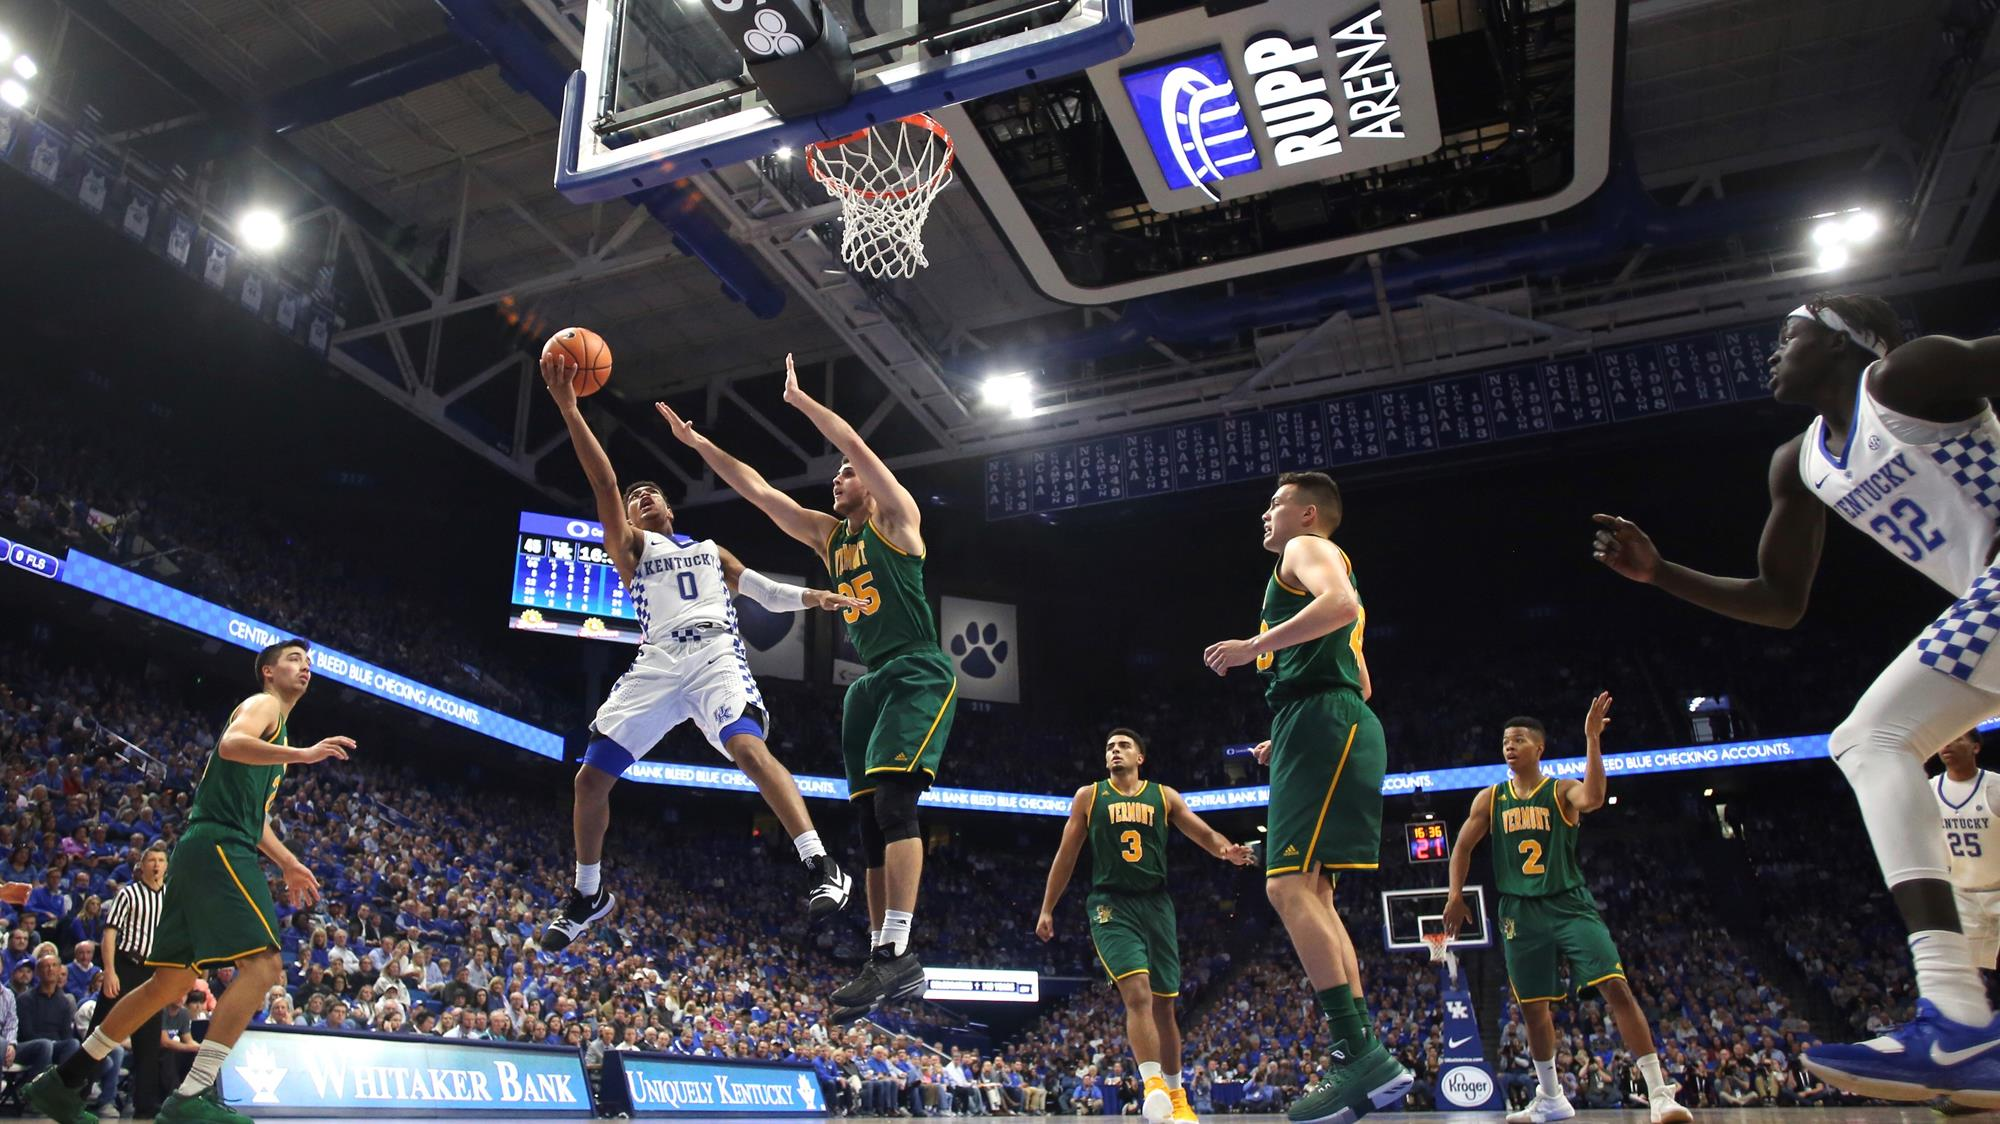 Fitfully, UK’s Growth Continues in Win over Vermont